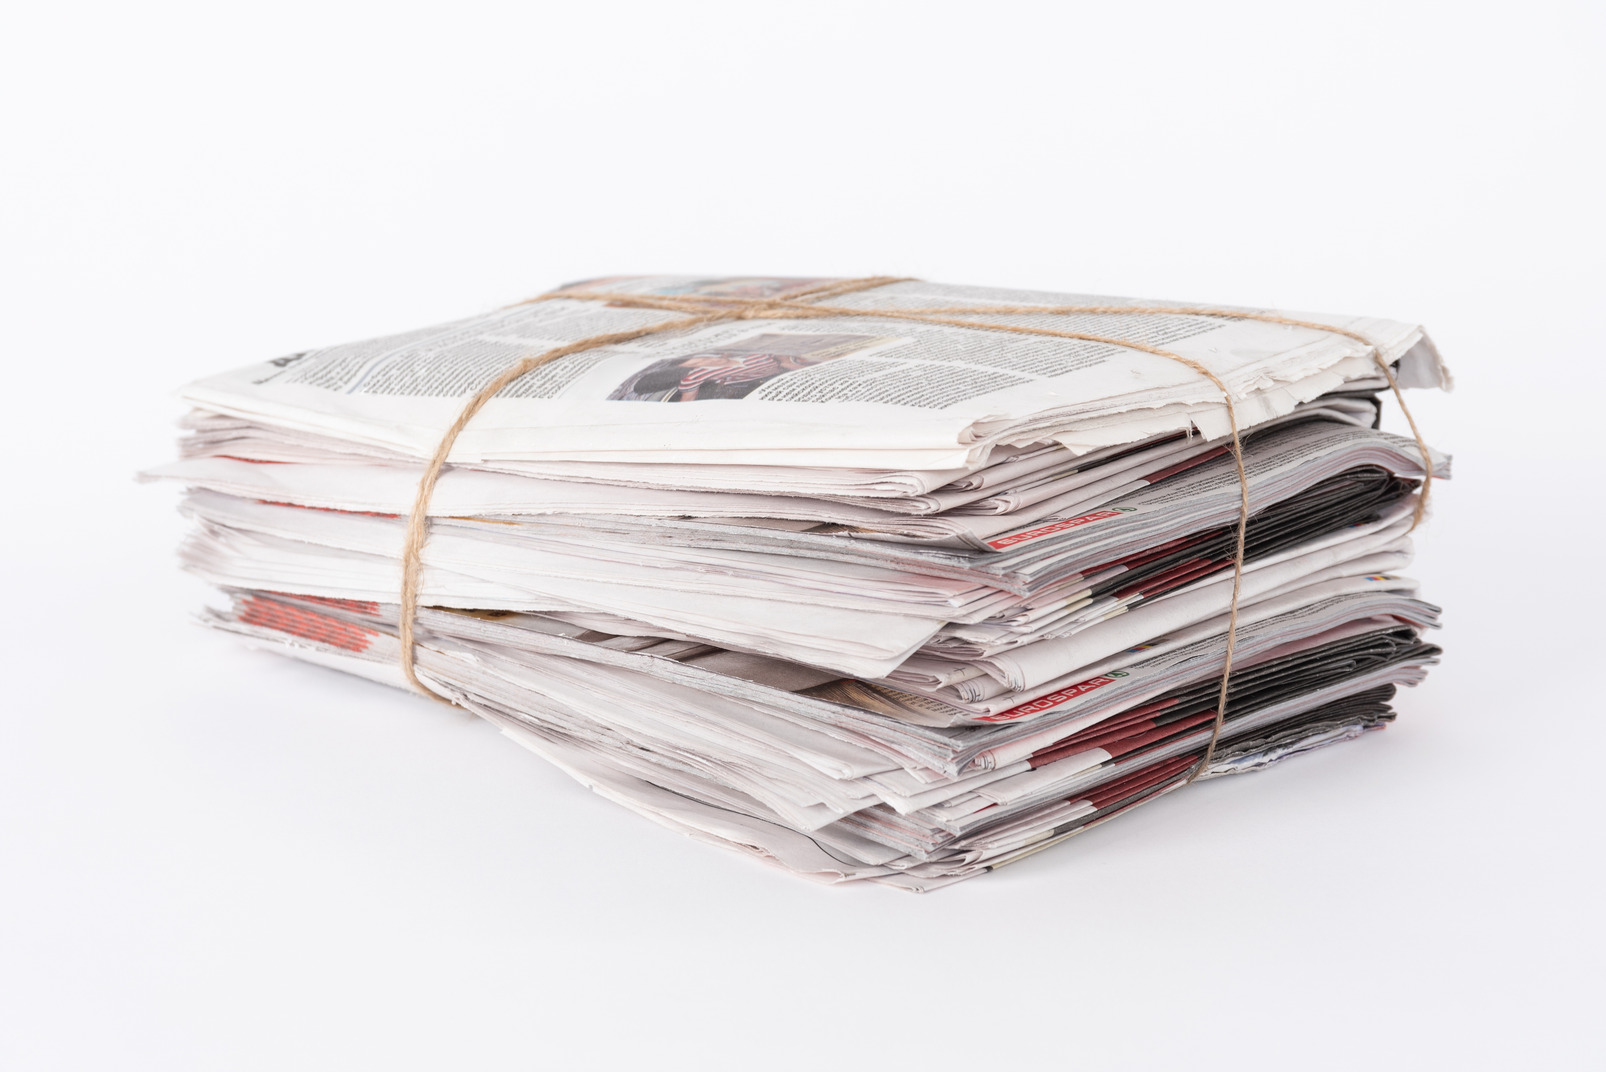 Pile of old newspapers on white background